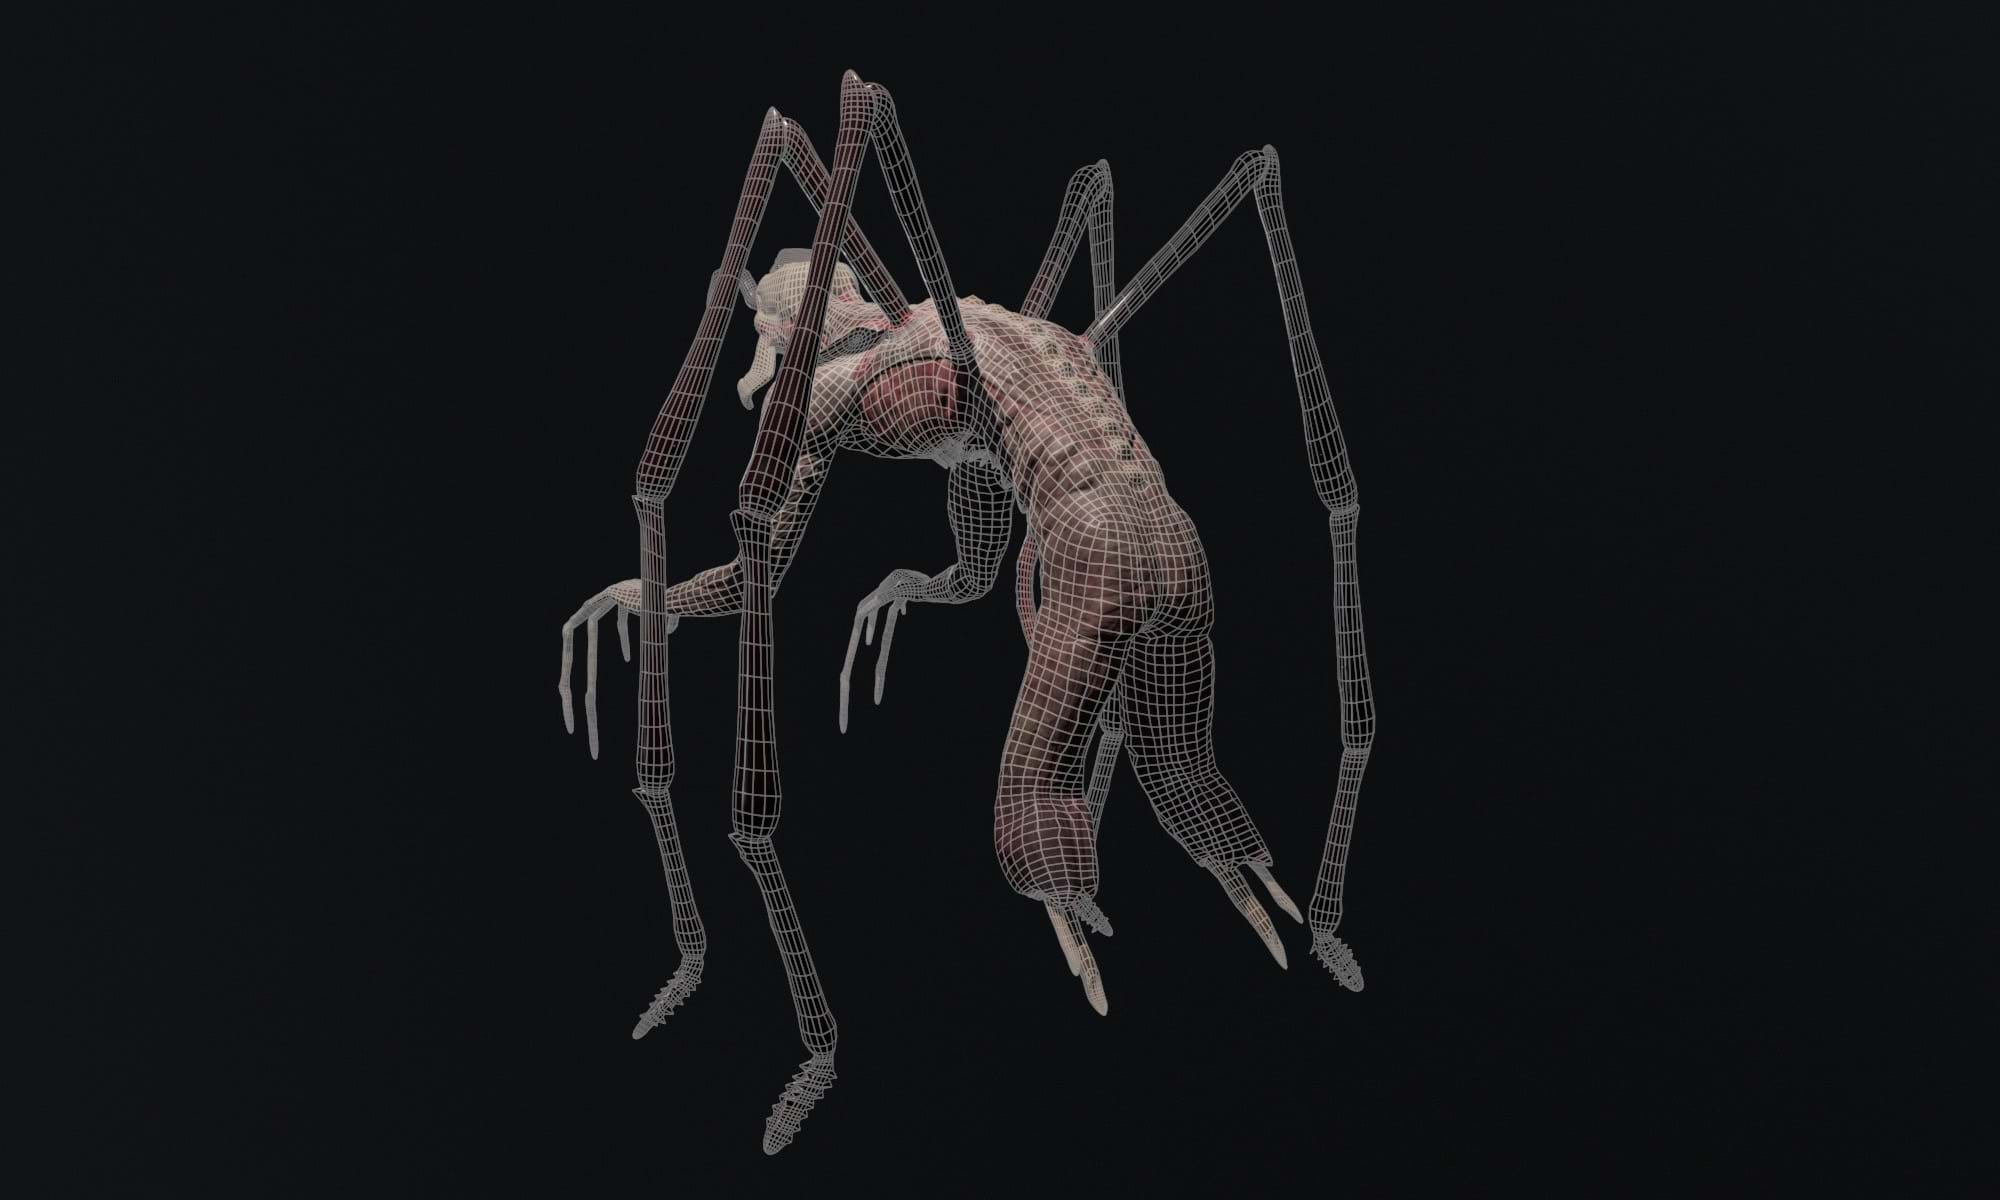 'Creating and Exploring Horror Through Creature Design' is a 2023 Digital Graduate Show project by Ewan Bruce, a Computer Arts student at Abertay University.